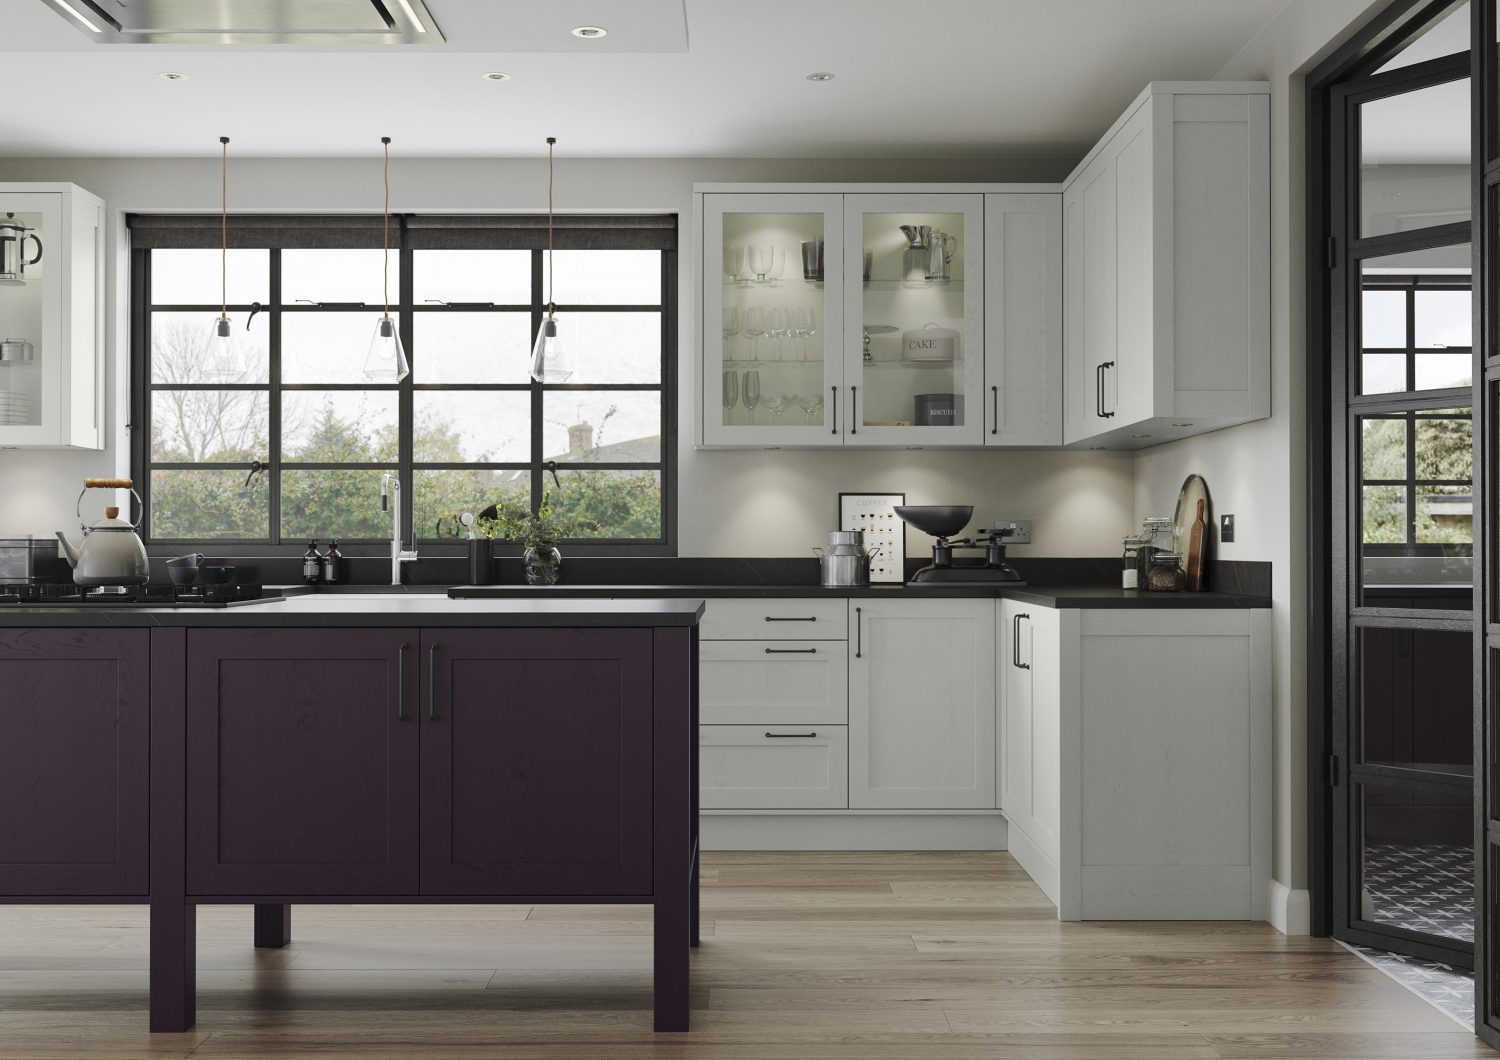 Alana Deep Heather and Light Grey shaker kitchen design by The Kitchen Depot front view of island and cabinet run along the window